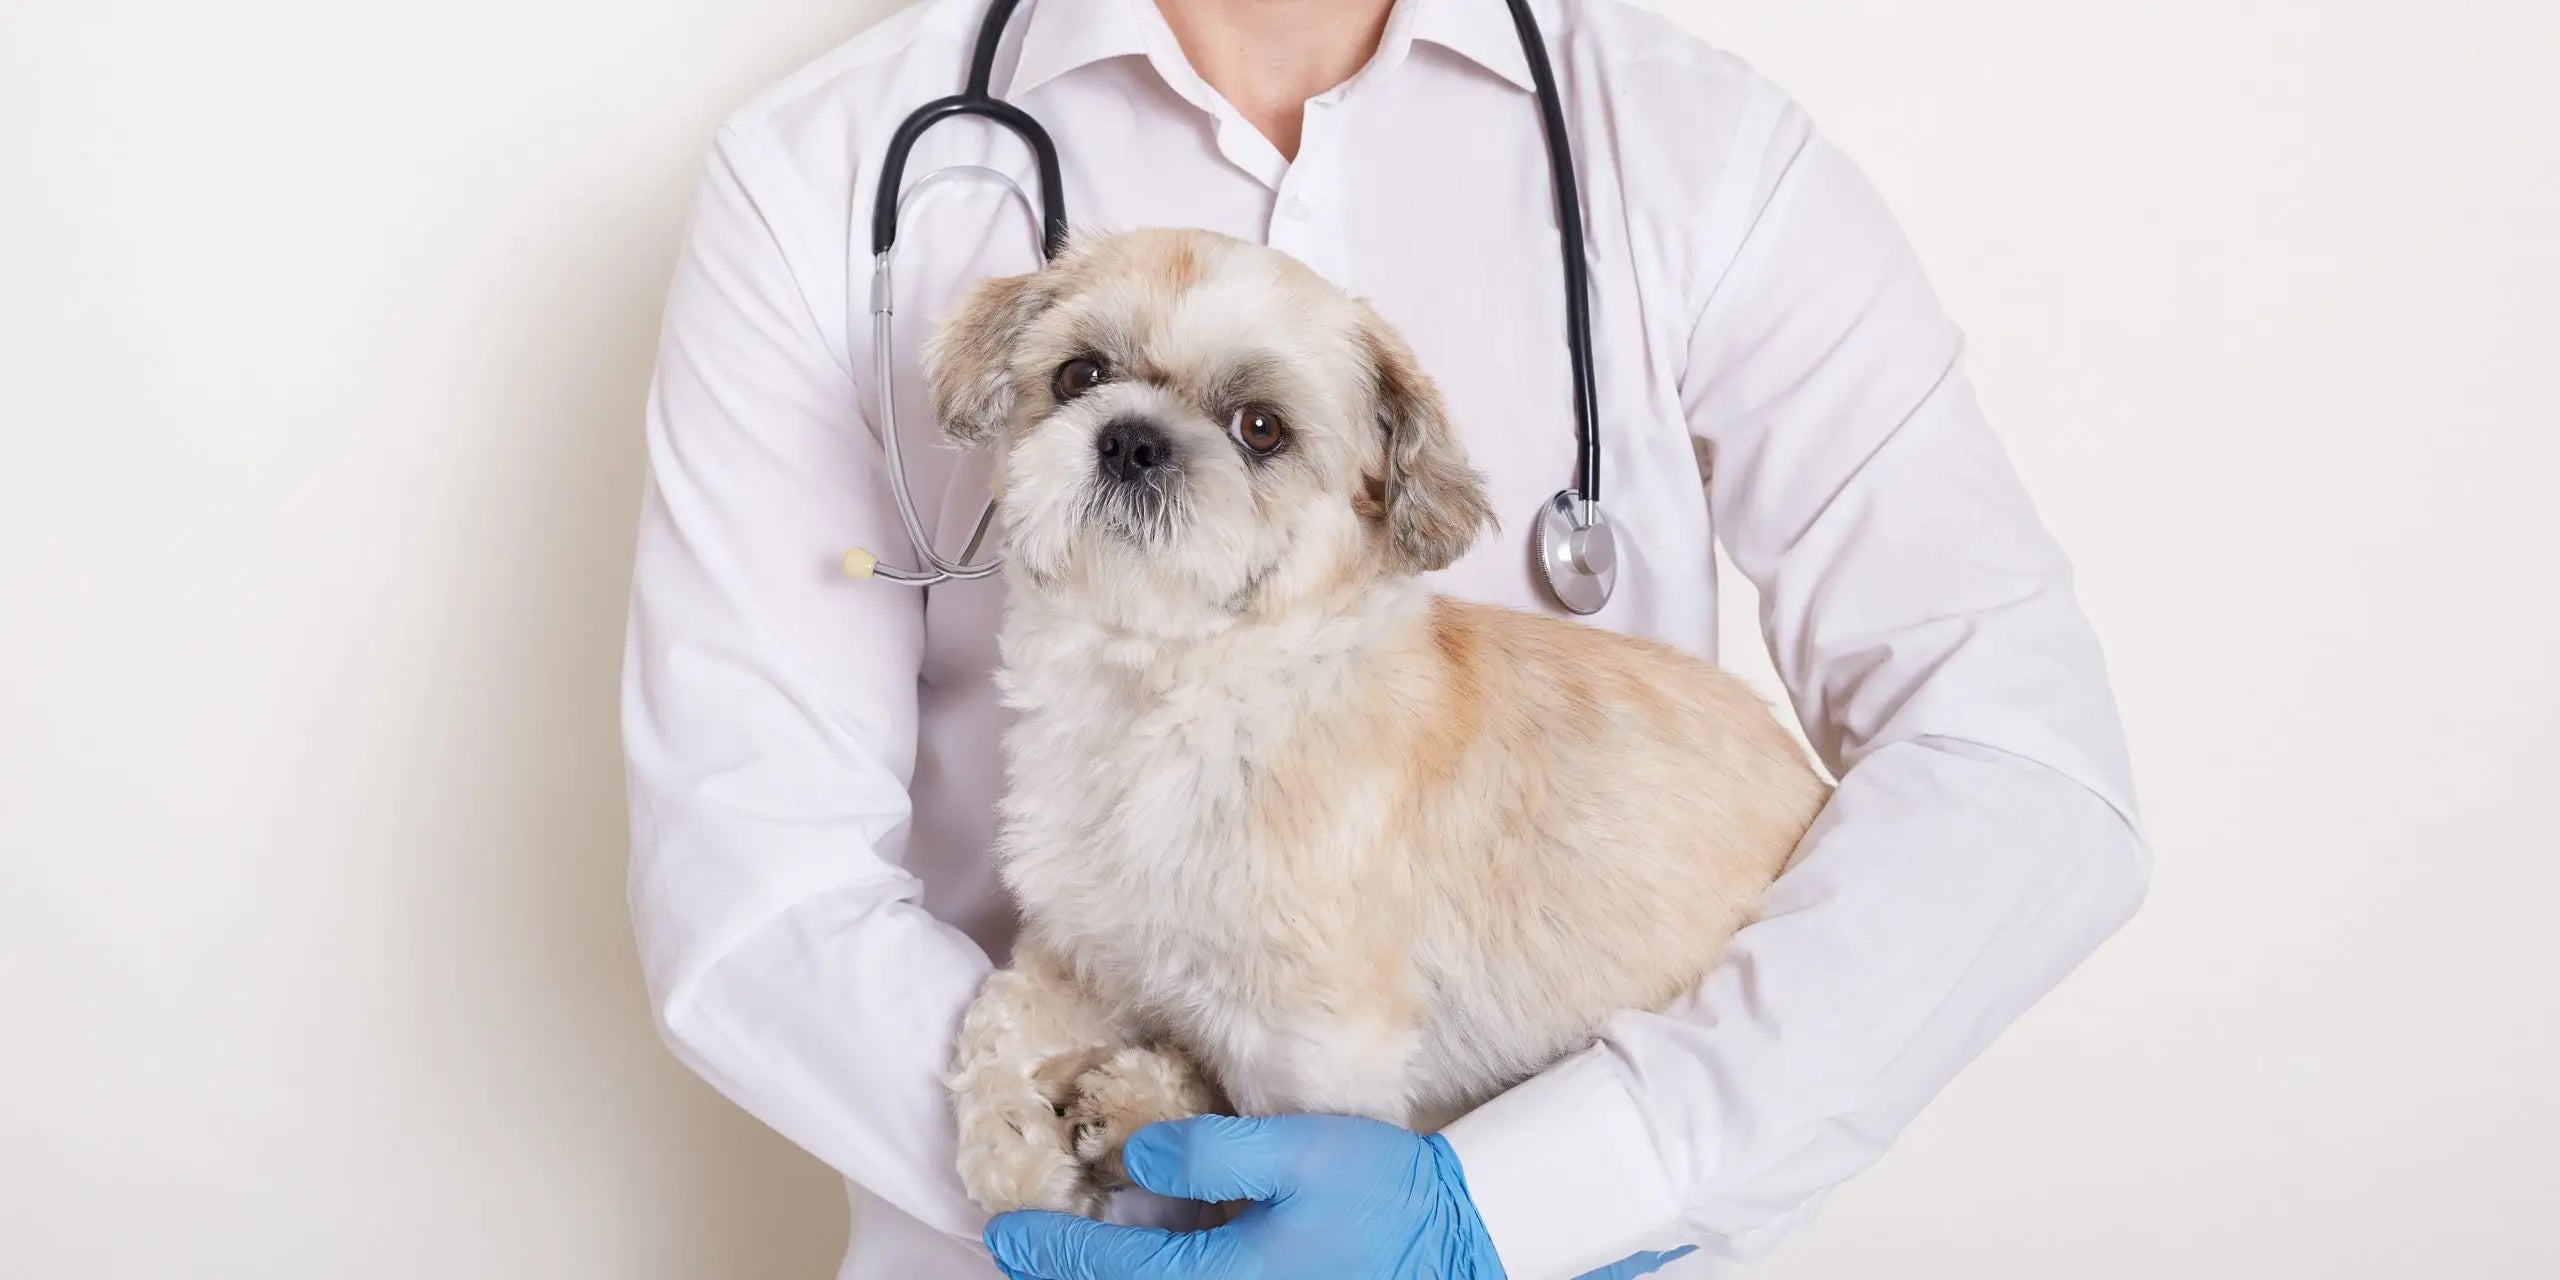 Before the examination is carried out, complete information must be established for the dog. The veterinarian will first conduct a consultation to understand the dog's daily living habits, and then evaluate the pet's basic physical condition through inspection, palpation, auscultation, etc.